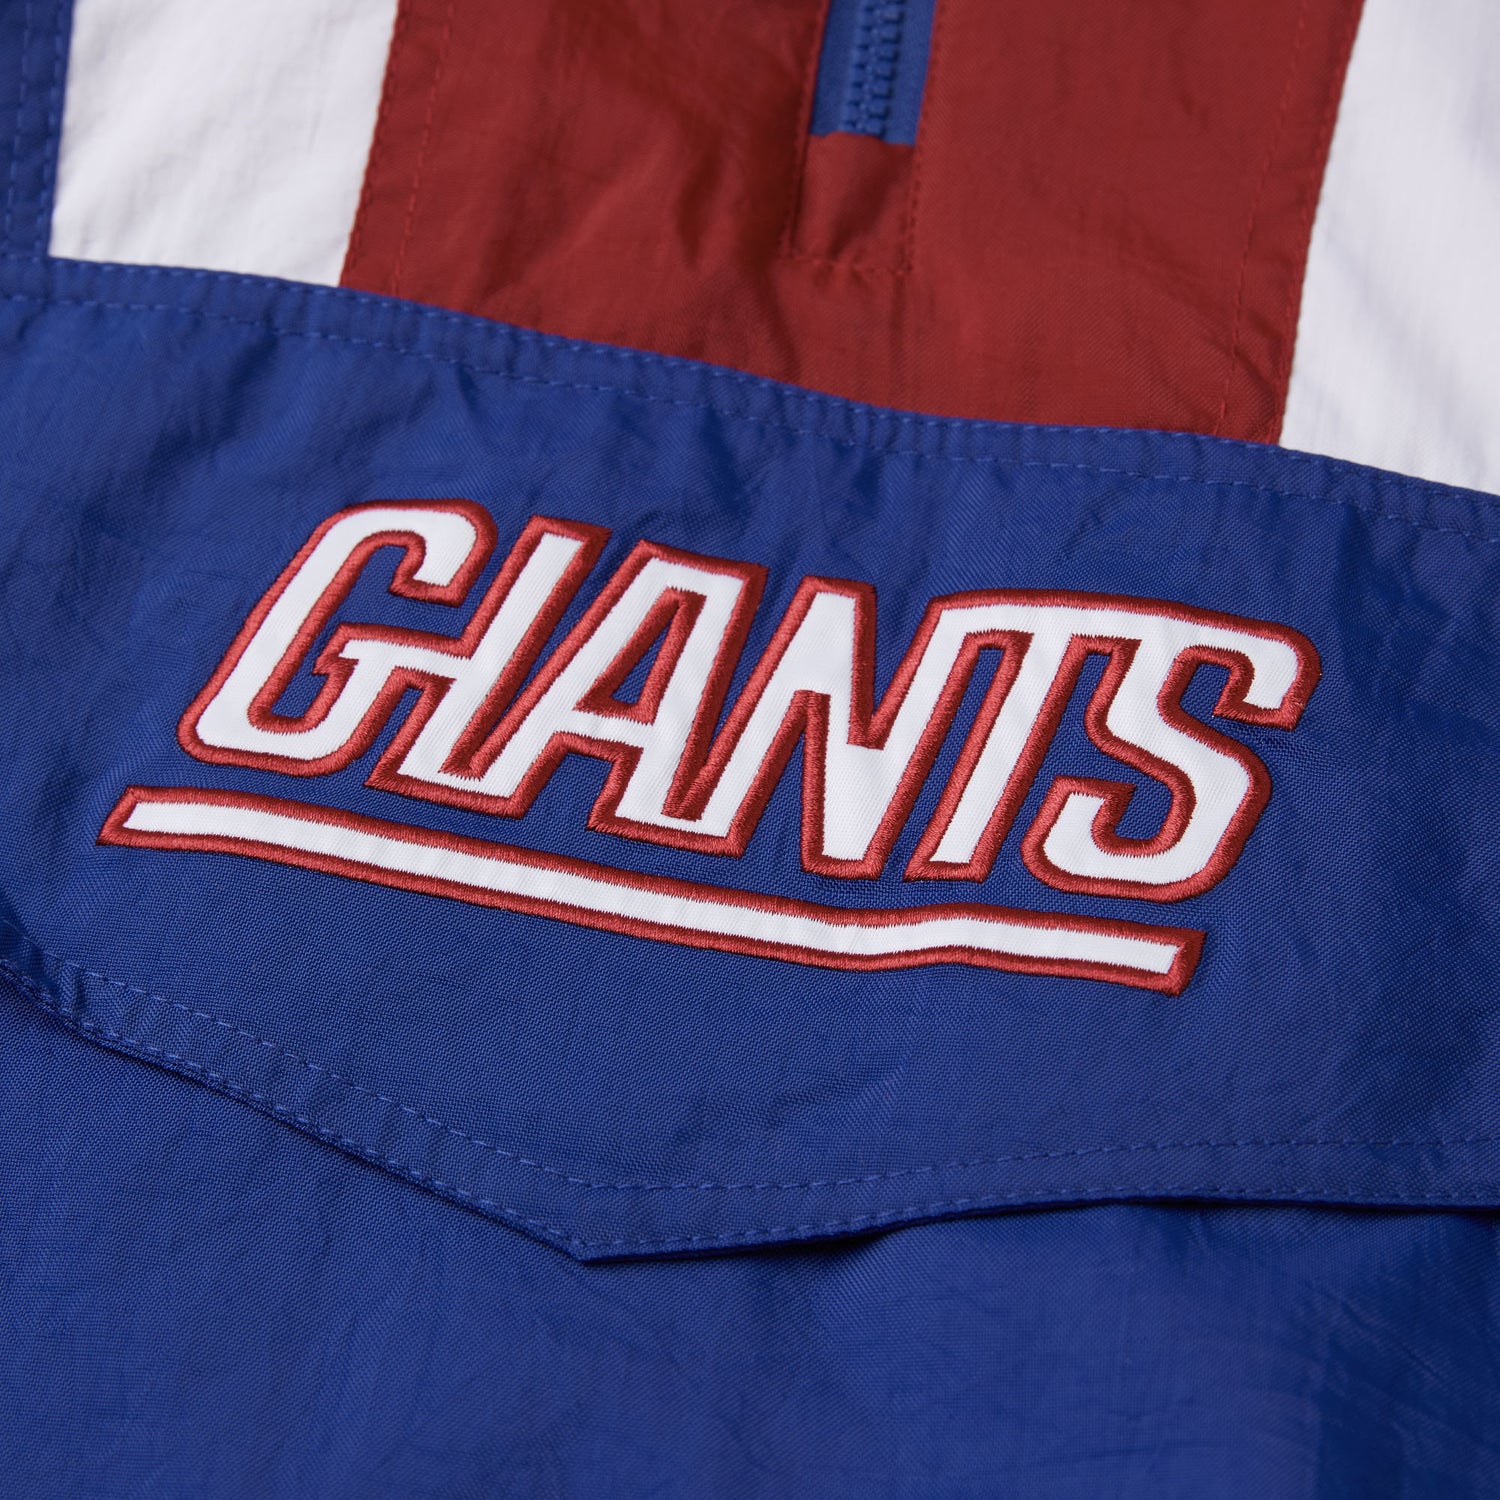 Starter Jackets Are Making a Comeback, Thanks to Former Giants